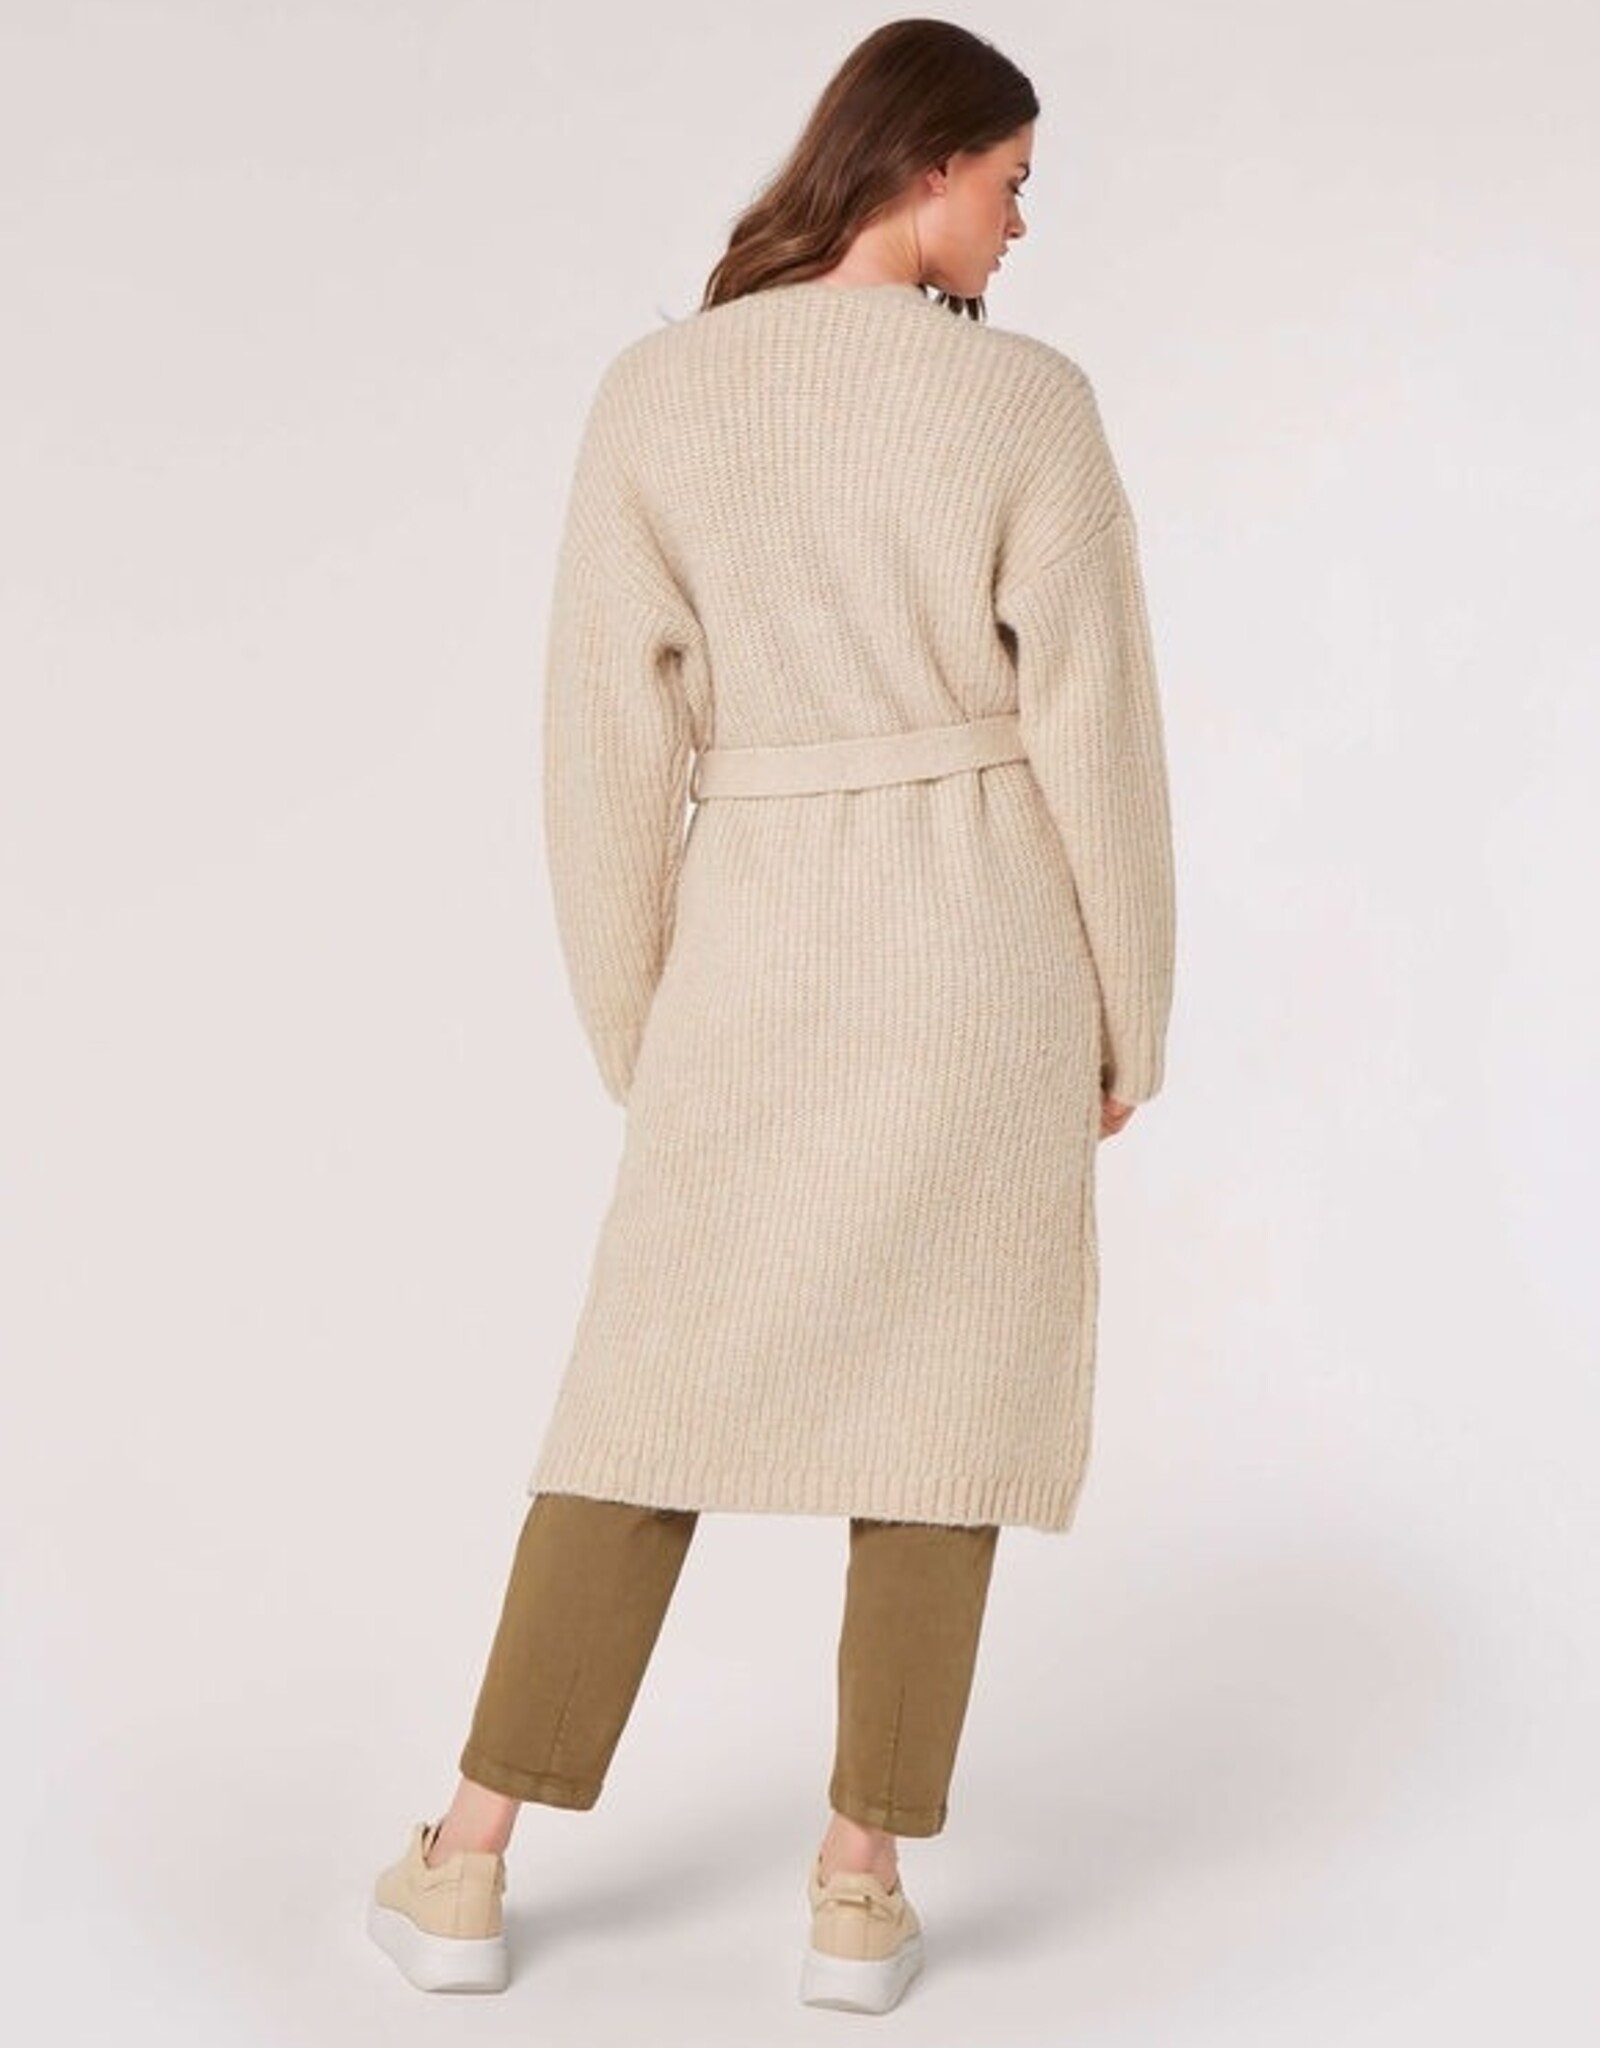 Apricot Apricot Luxe Fisherman Knit In Longline Cardigan